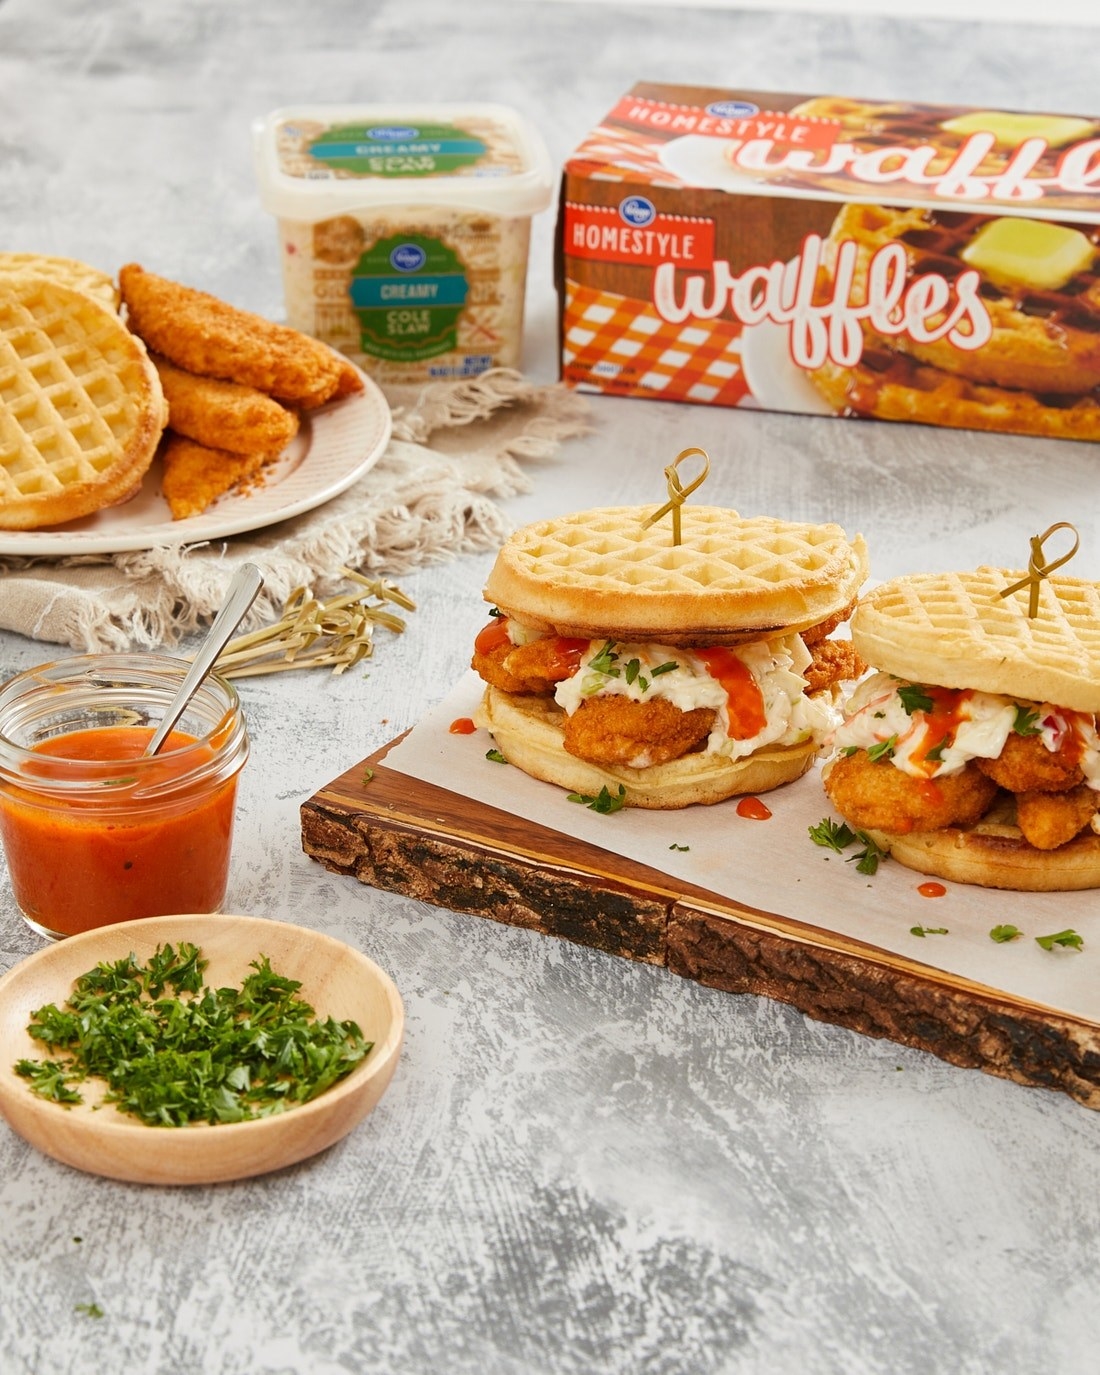 Chicken tender and waffle sandwiches on a serving platter